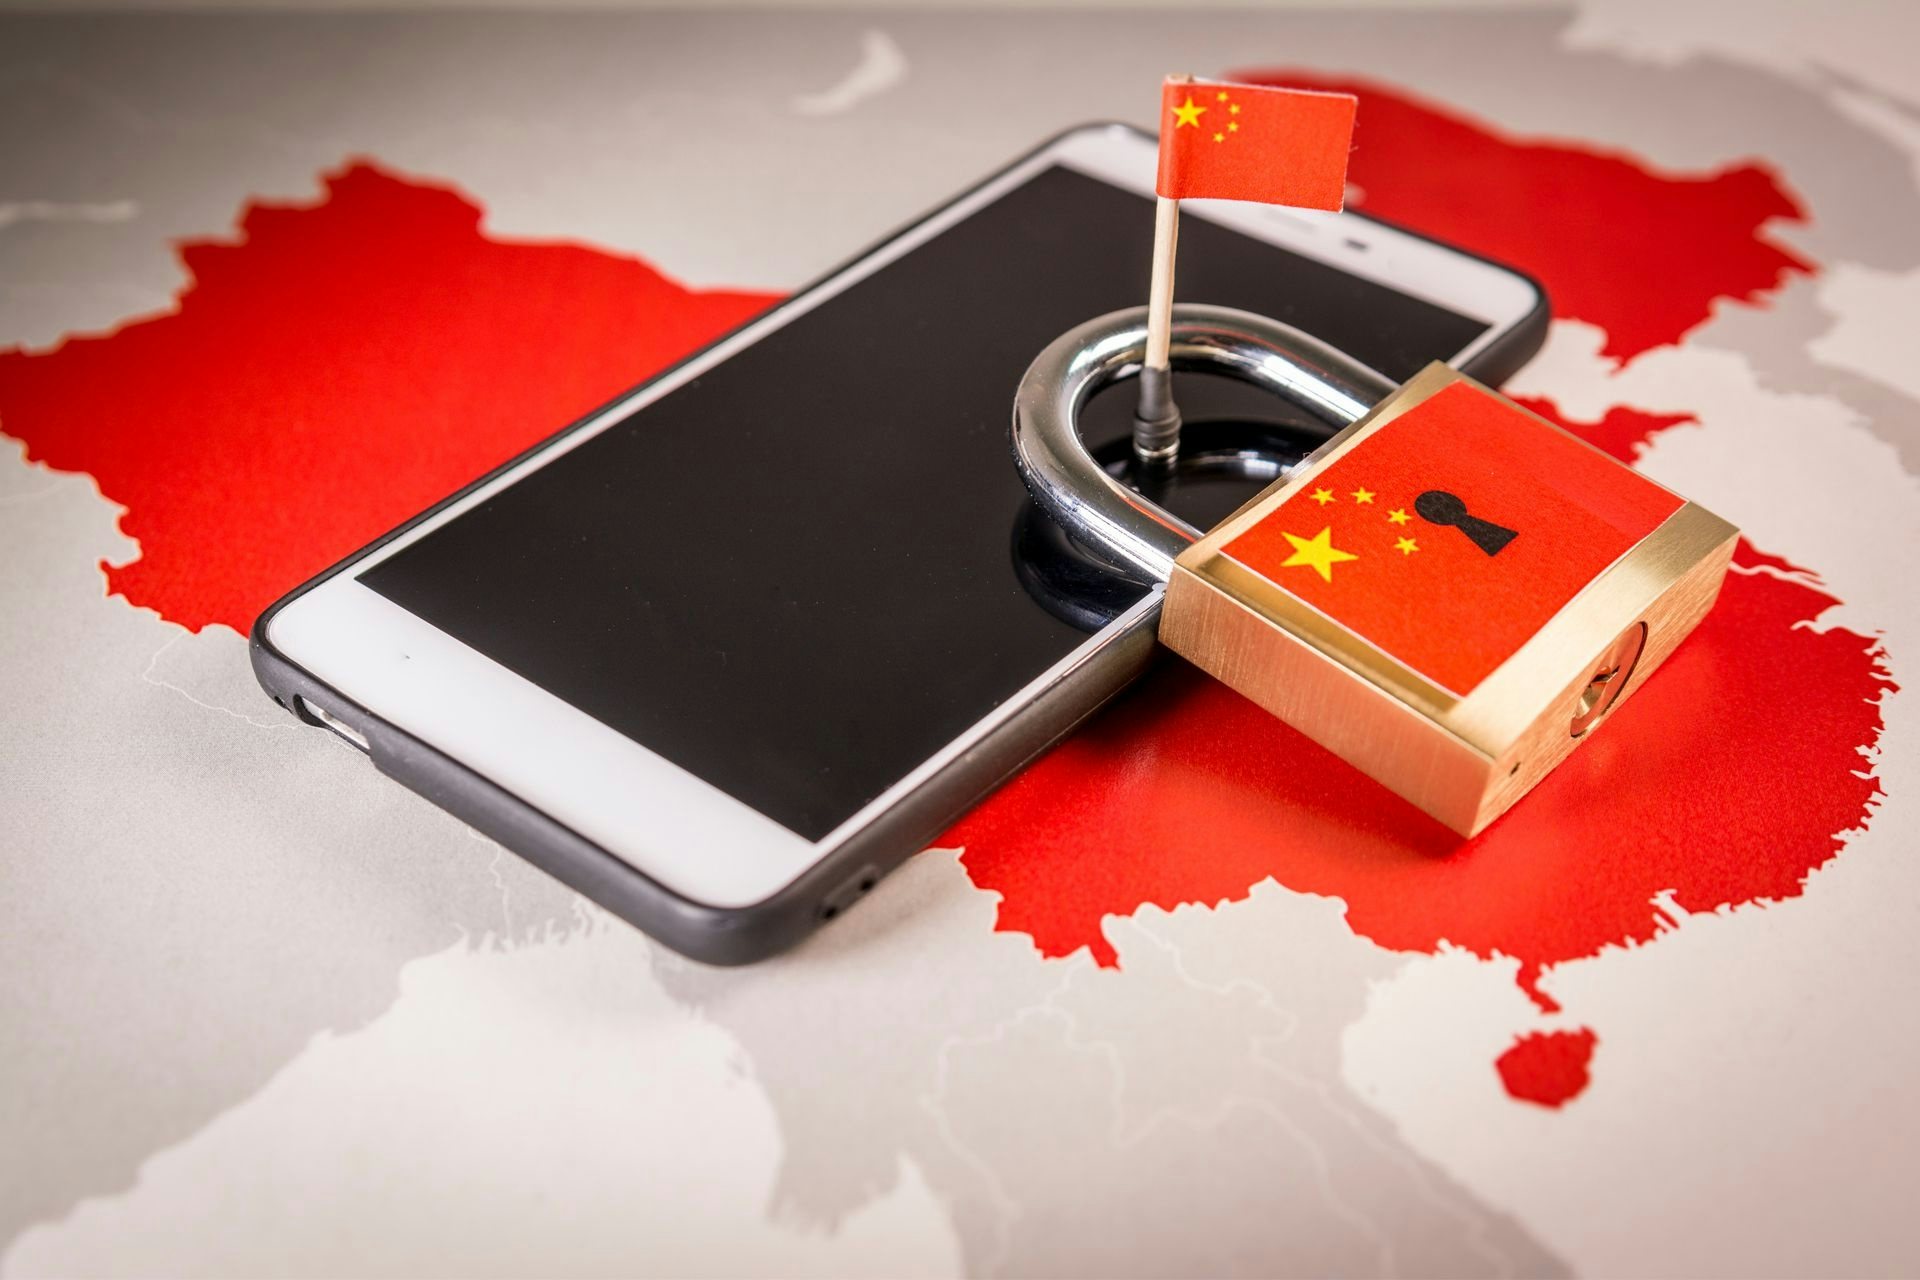 China's new censorship regulations may impact how luxury brands use short-video apps to market their products. Image: Shutterstock